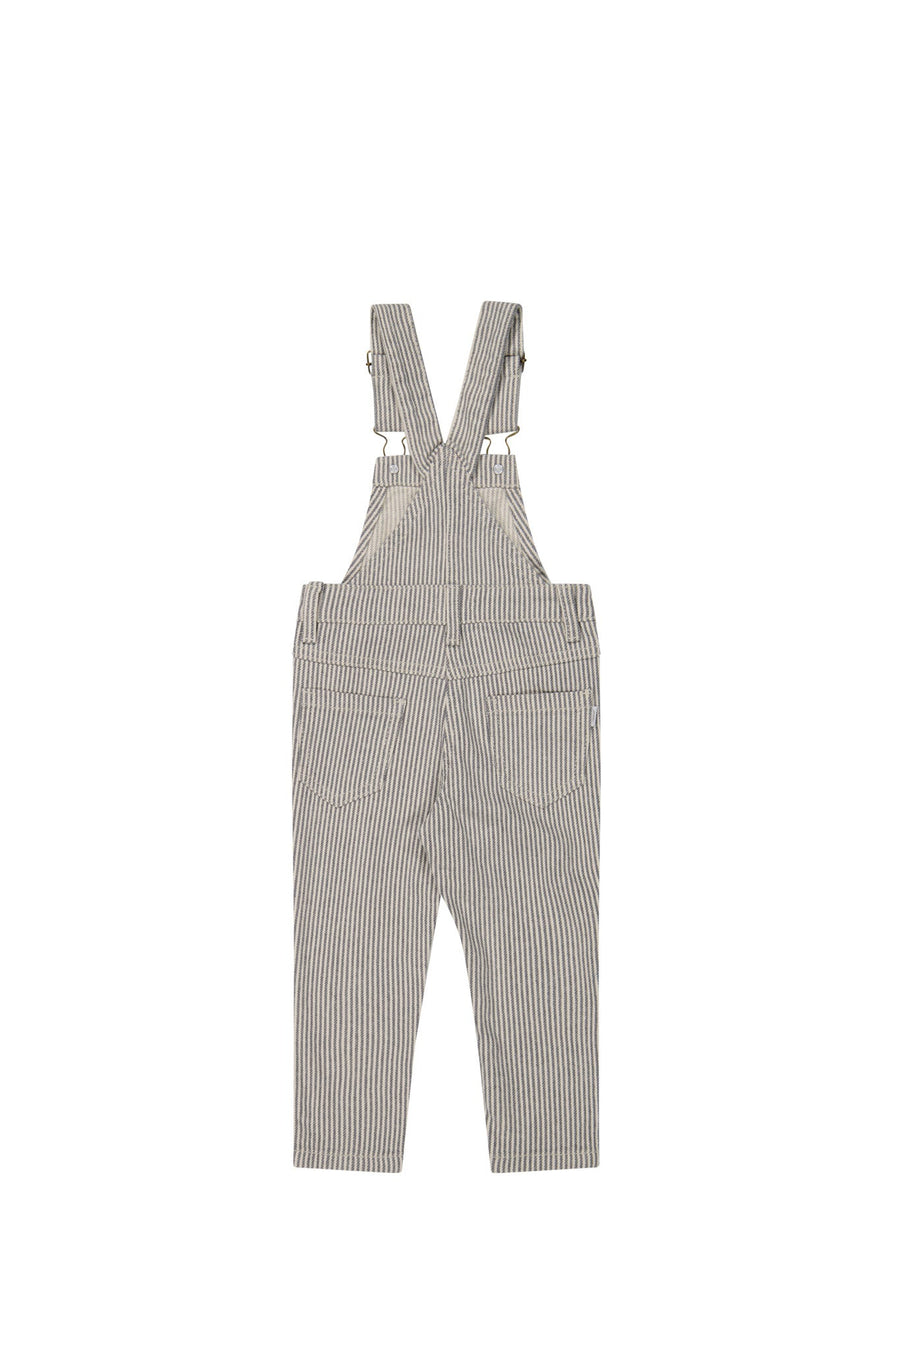 Jordie Overall - Smoke/Egret Childrens Overall from Jamie Kay USA